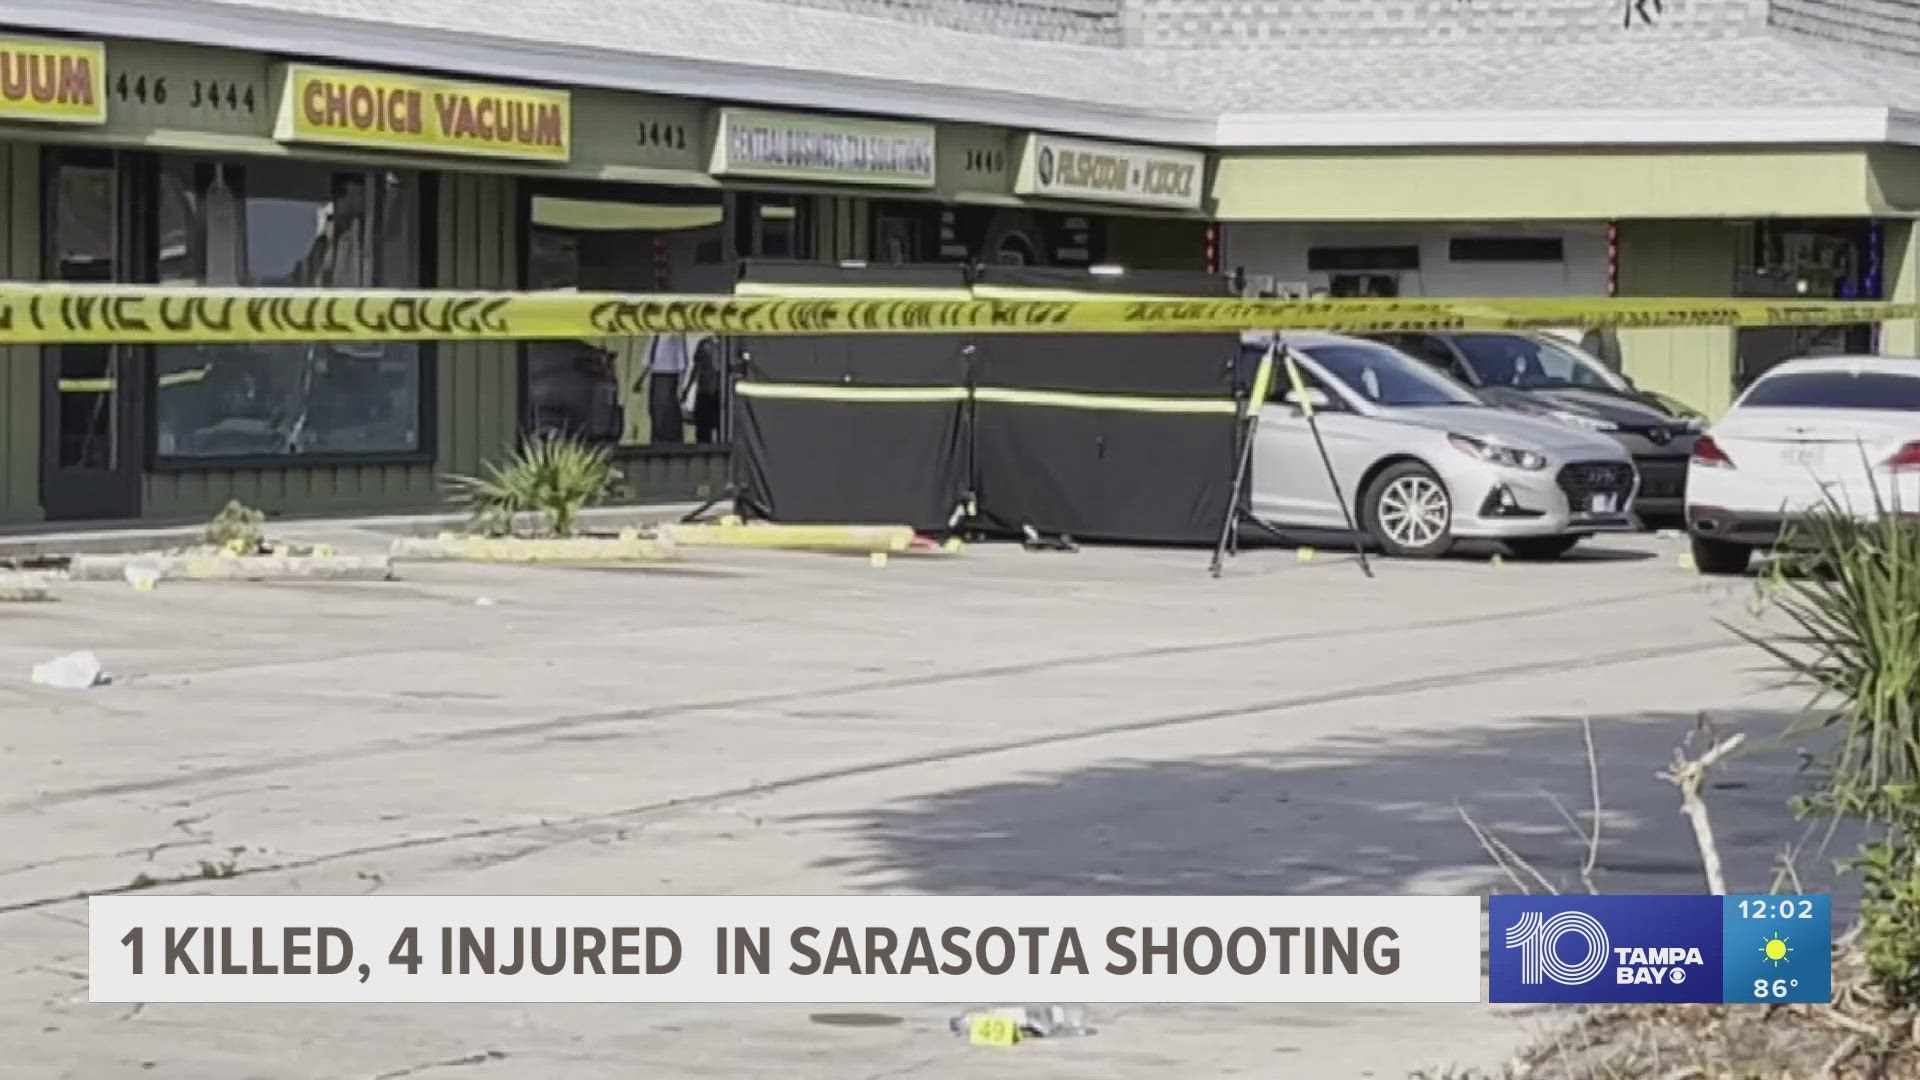 Law enforcement is investigating two shootings in Sarasota County and one in Hillsborough County after a violent weekend.